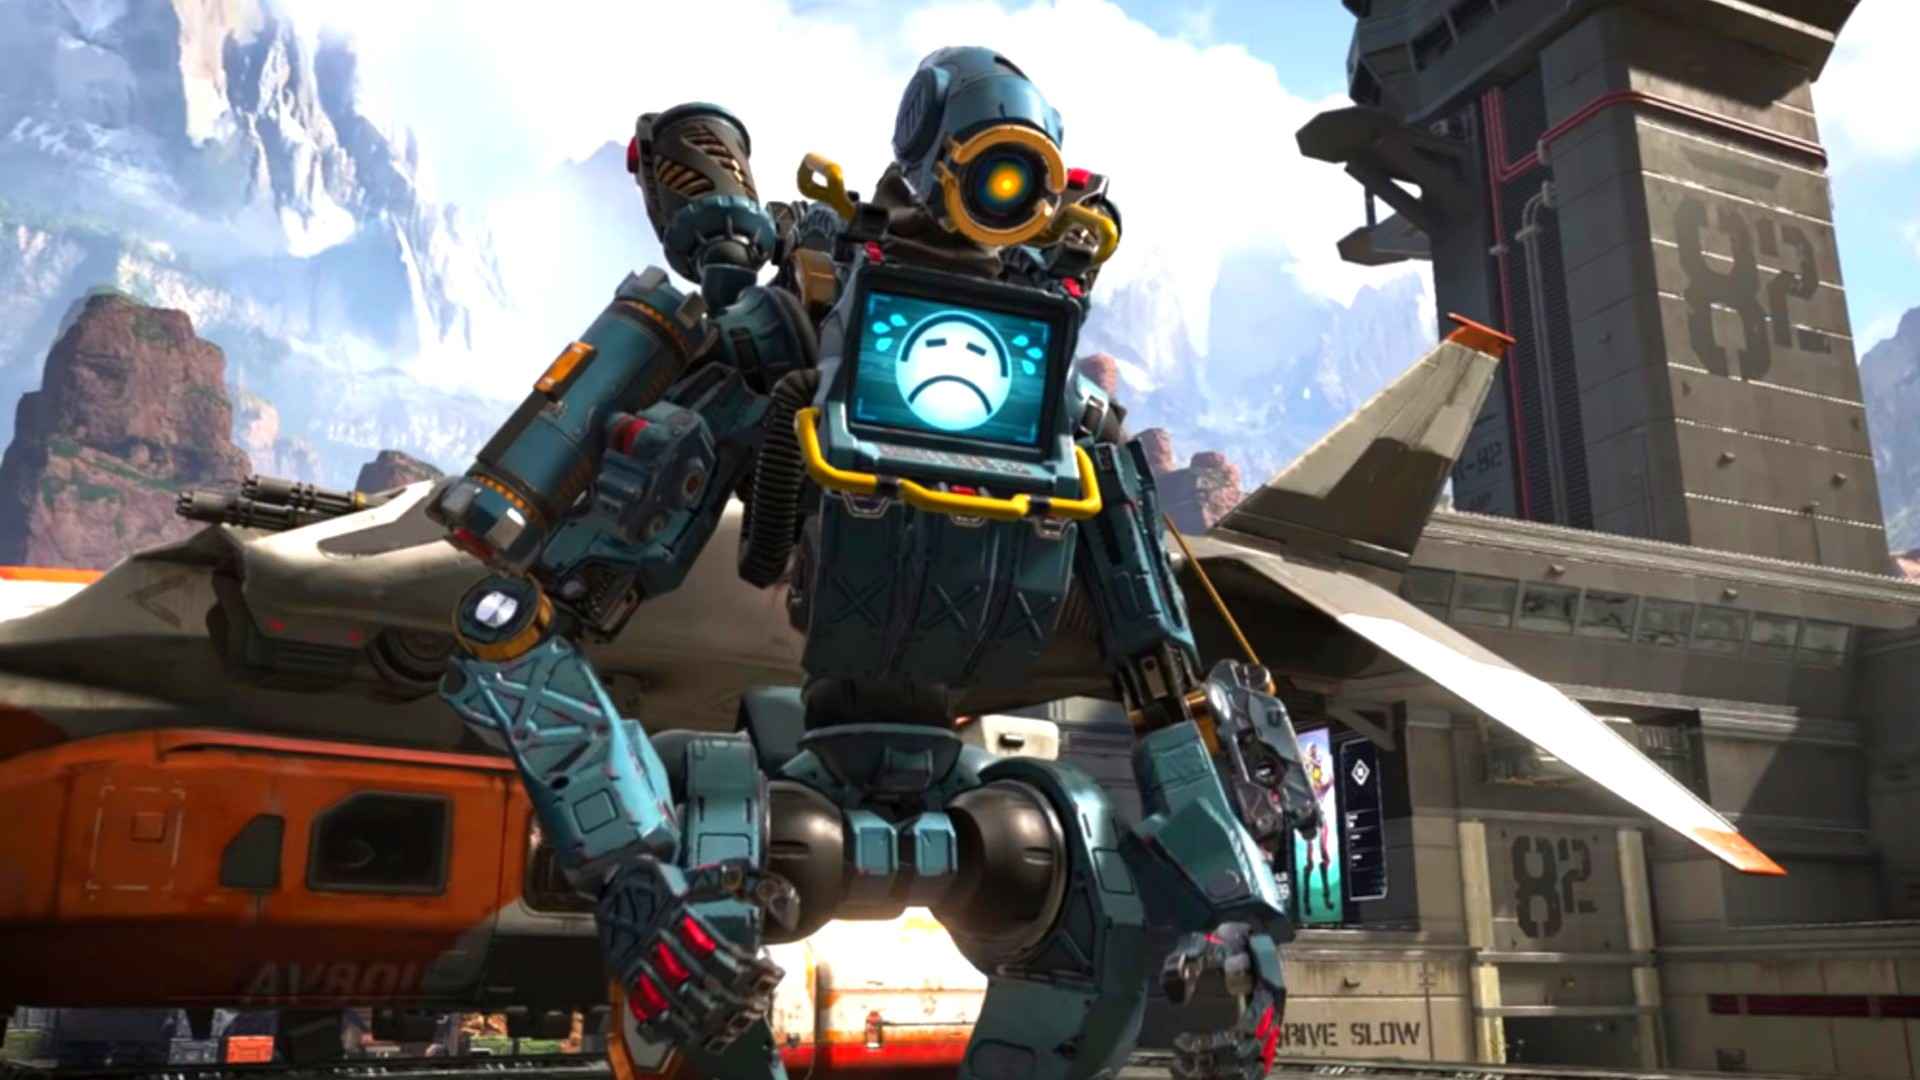 Apex Legends Update 1.35 Patch Now Live, Playlist Selector and Controls Improvements